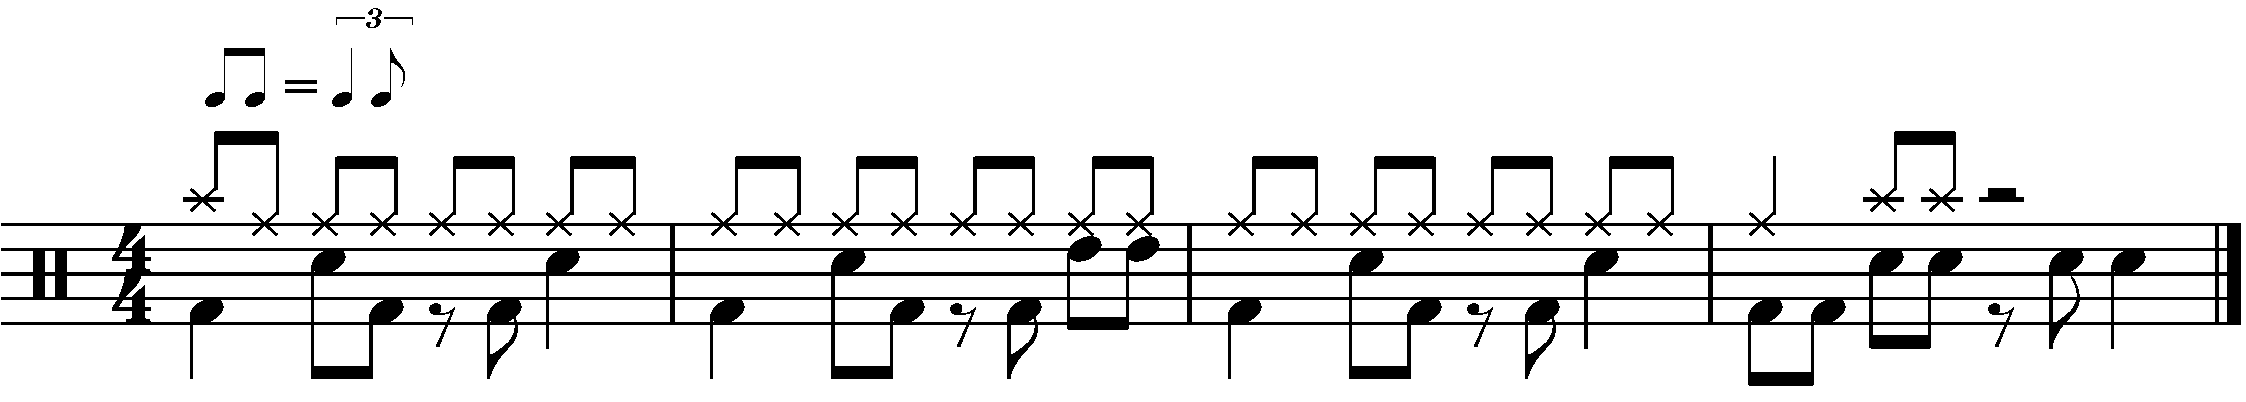 A four bar phrase made up of A B and C sections in swing time